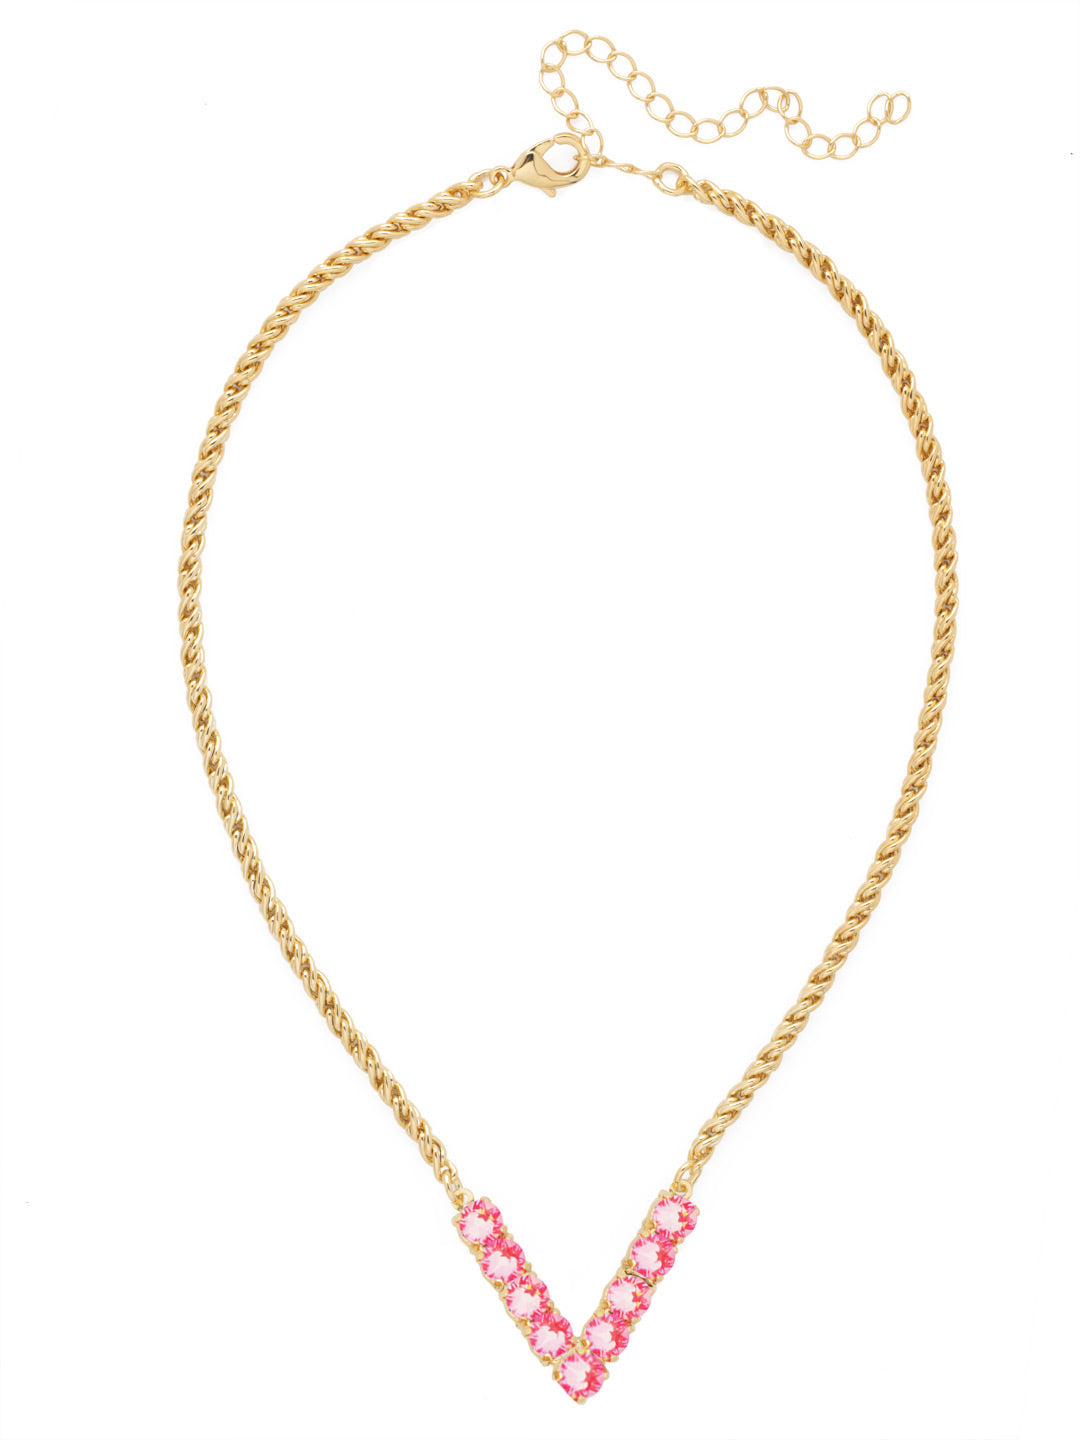 V Initial Rope Pendant Necklace - NFK41BGETP - <p>The Initial Rope Pendant Necklace features a crystal encrusted metal monogram pendant on an adjustable rope chain, secured with a lobster claw clasp. From Sorrelli's Electric Pink collection in our Bright Gold-tone finish.</p>